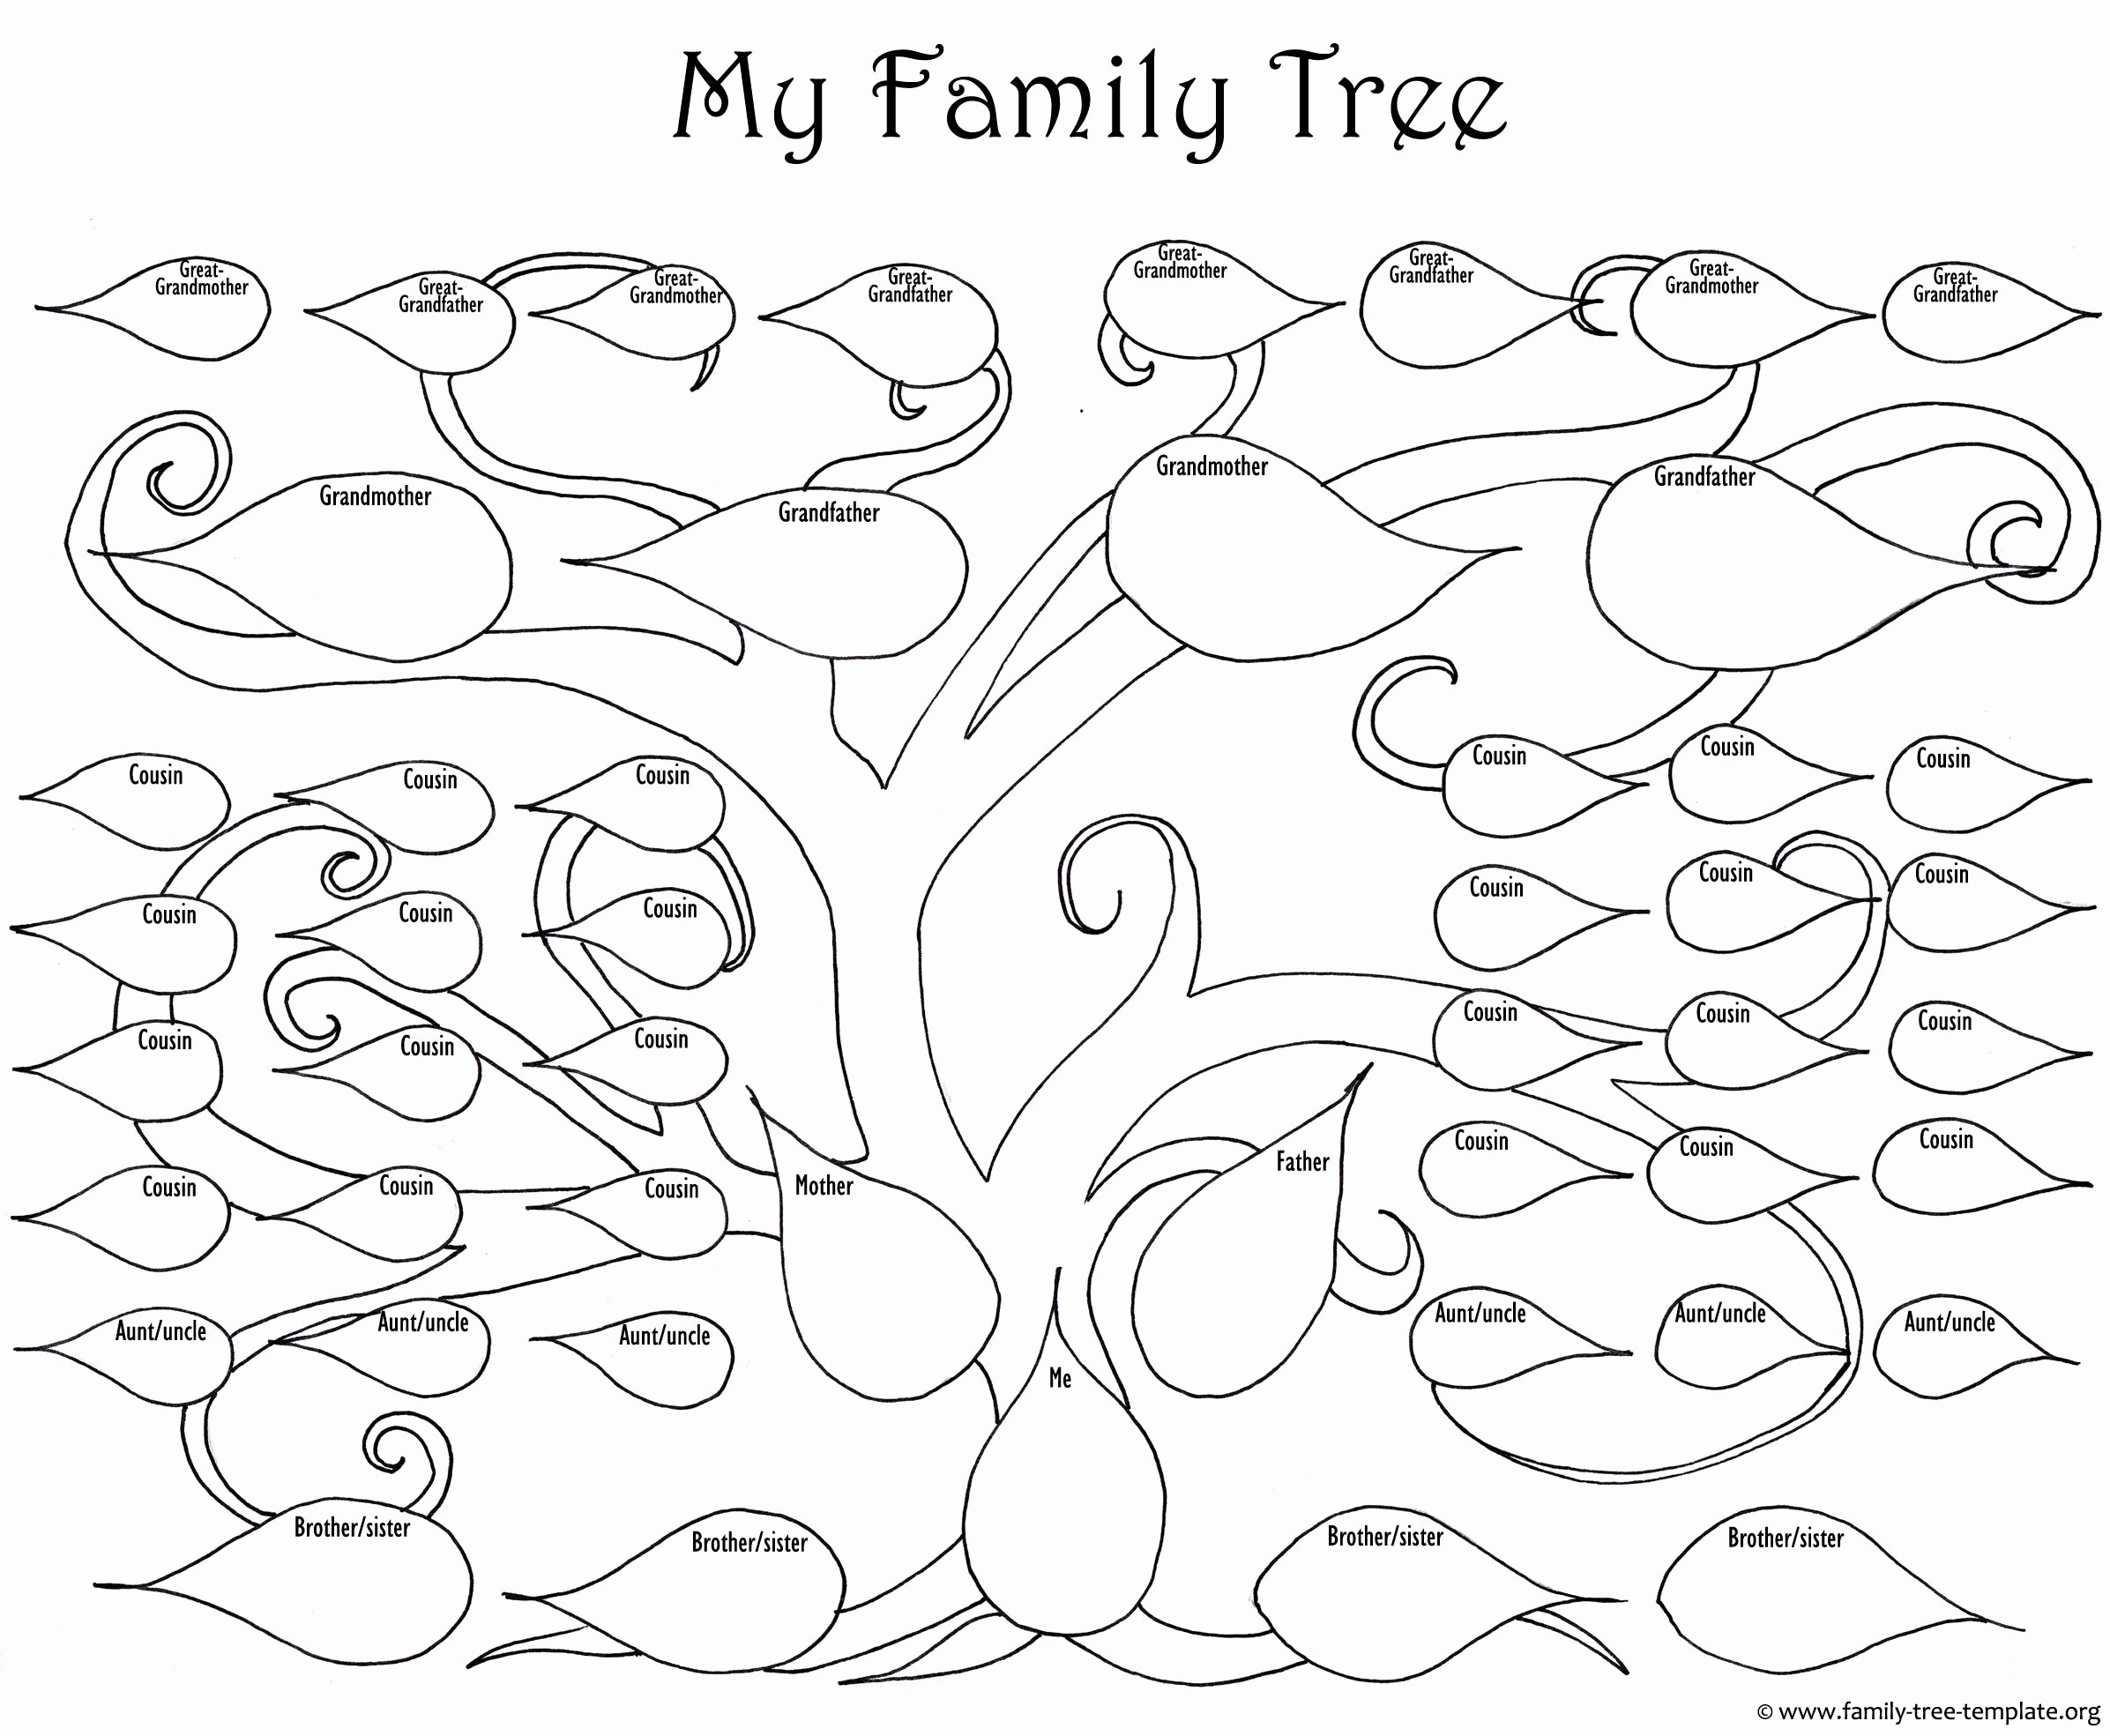 Simple Family Tree Template Luxury A Printable Blank Family Tree to Make Your Kids Genealogy